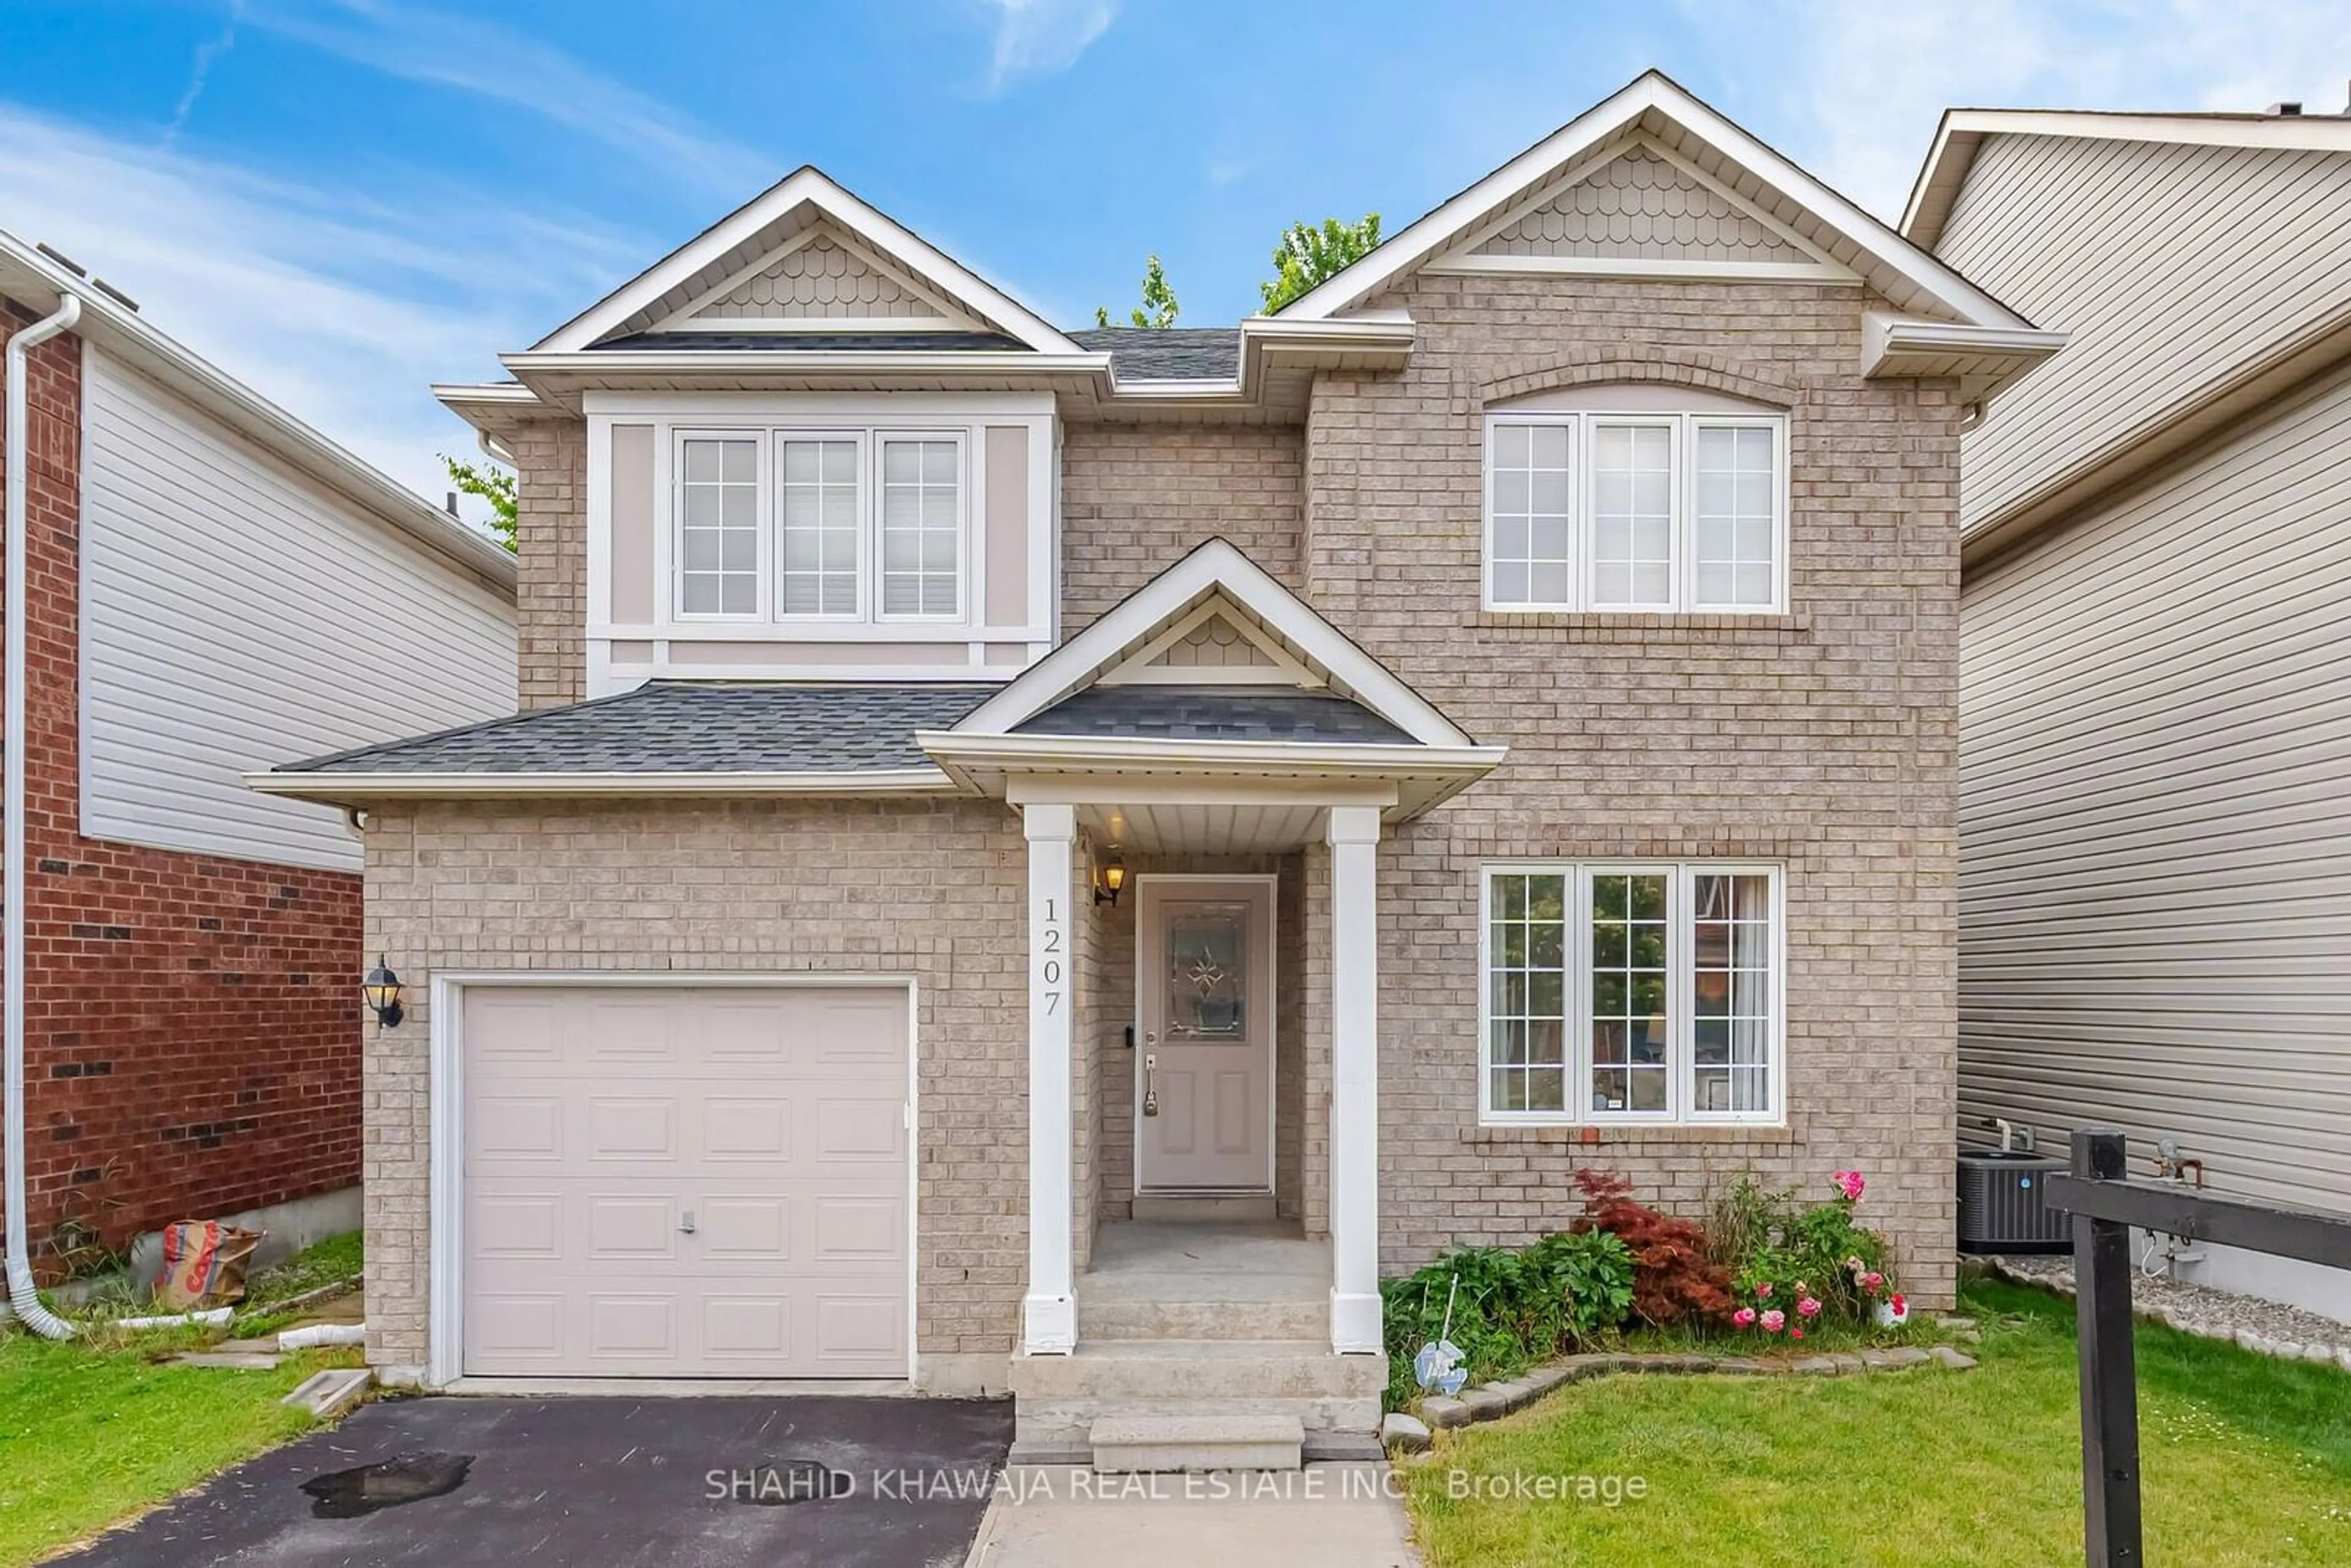 Home with brick exterior material for 1207 Newell St, Milton Ontario L9T 5R5